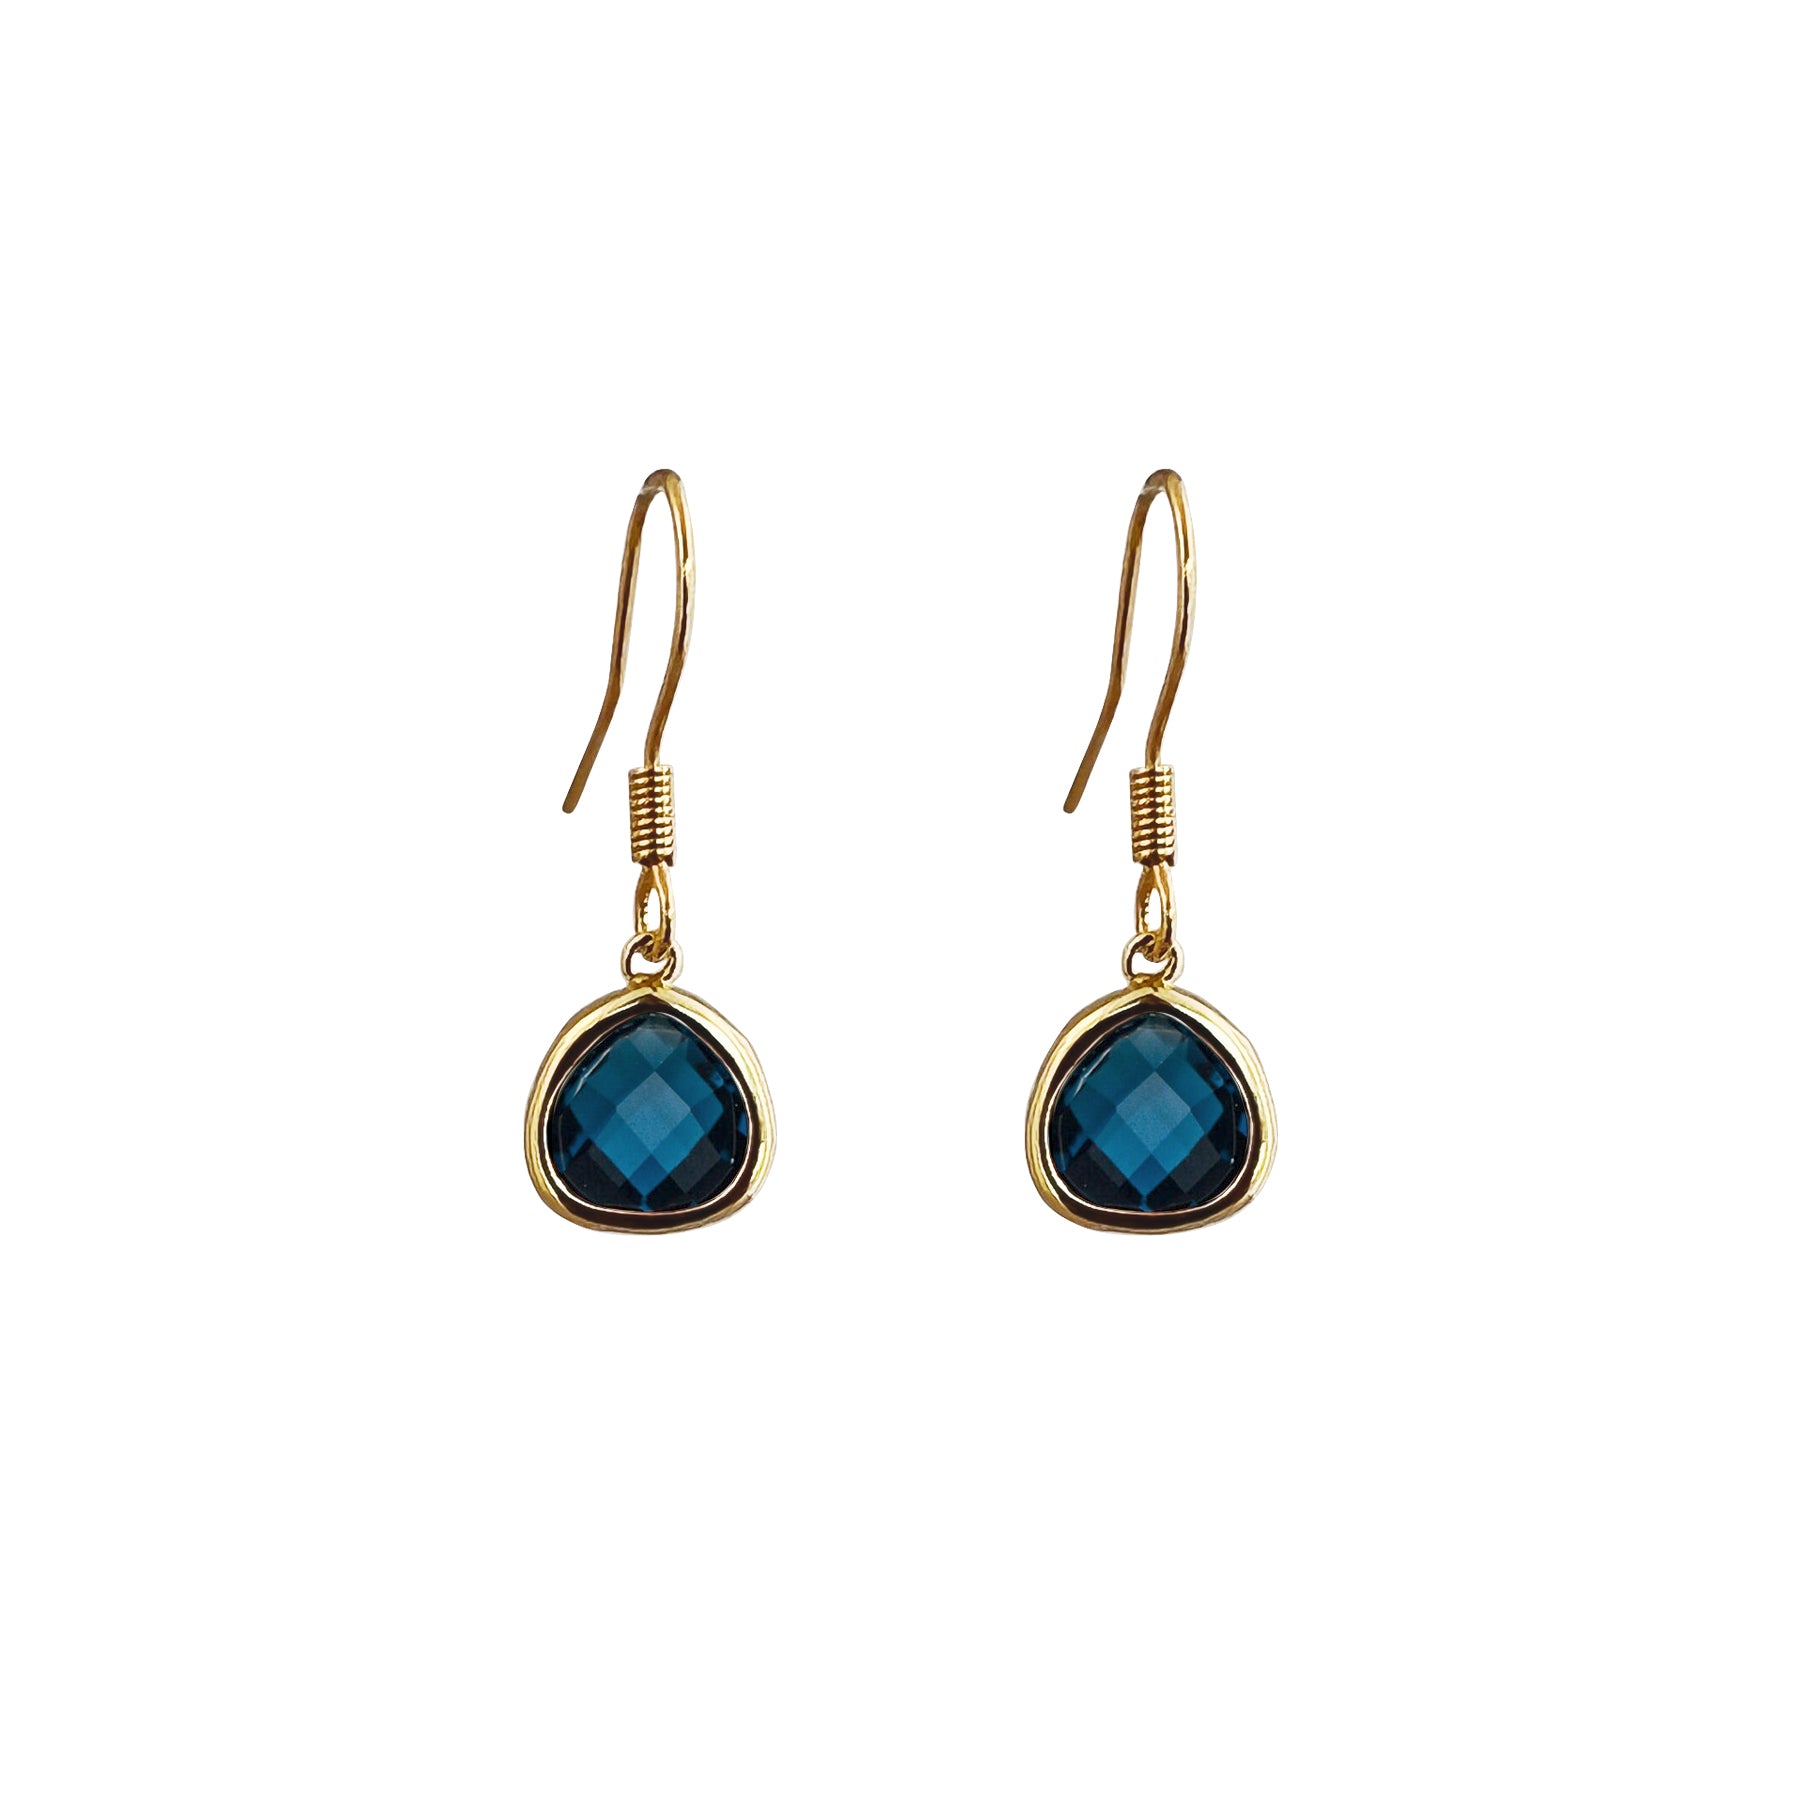 Gold pendant earrings with navy crystal drops 